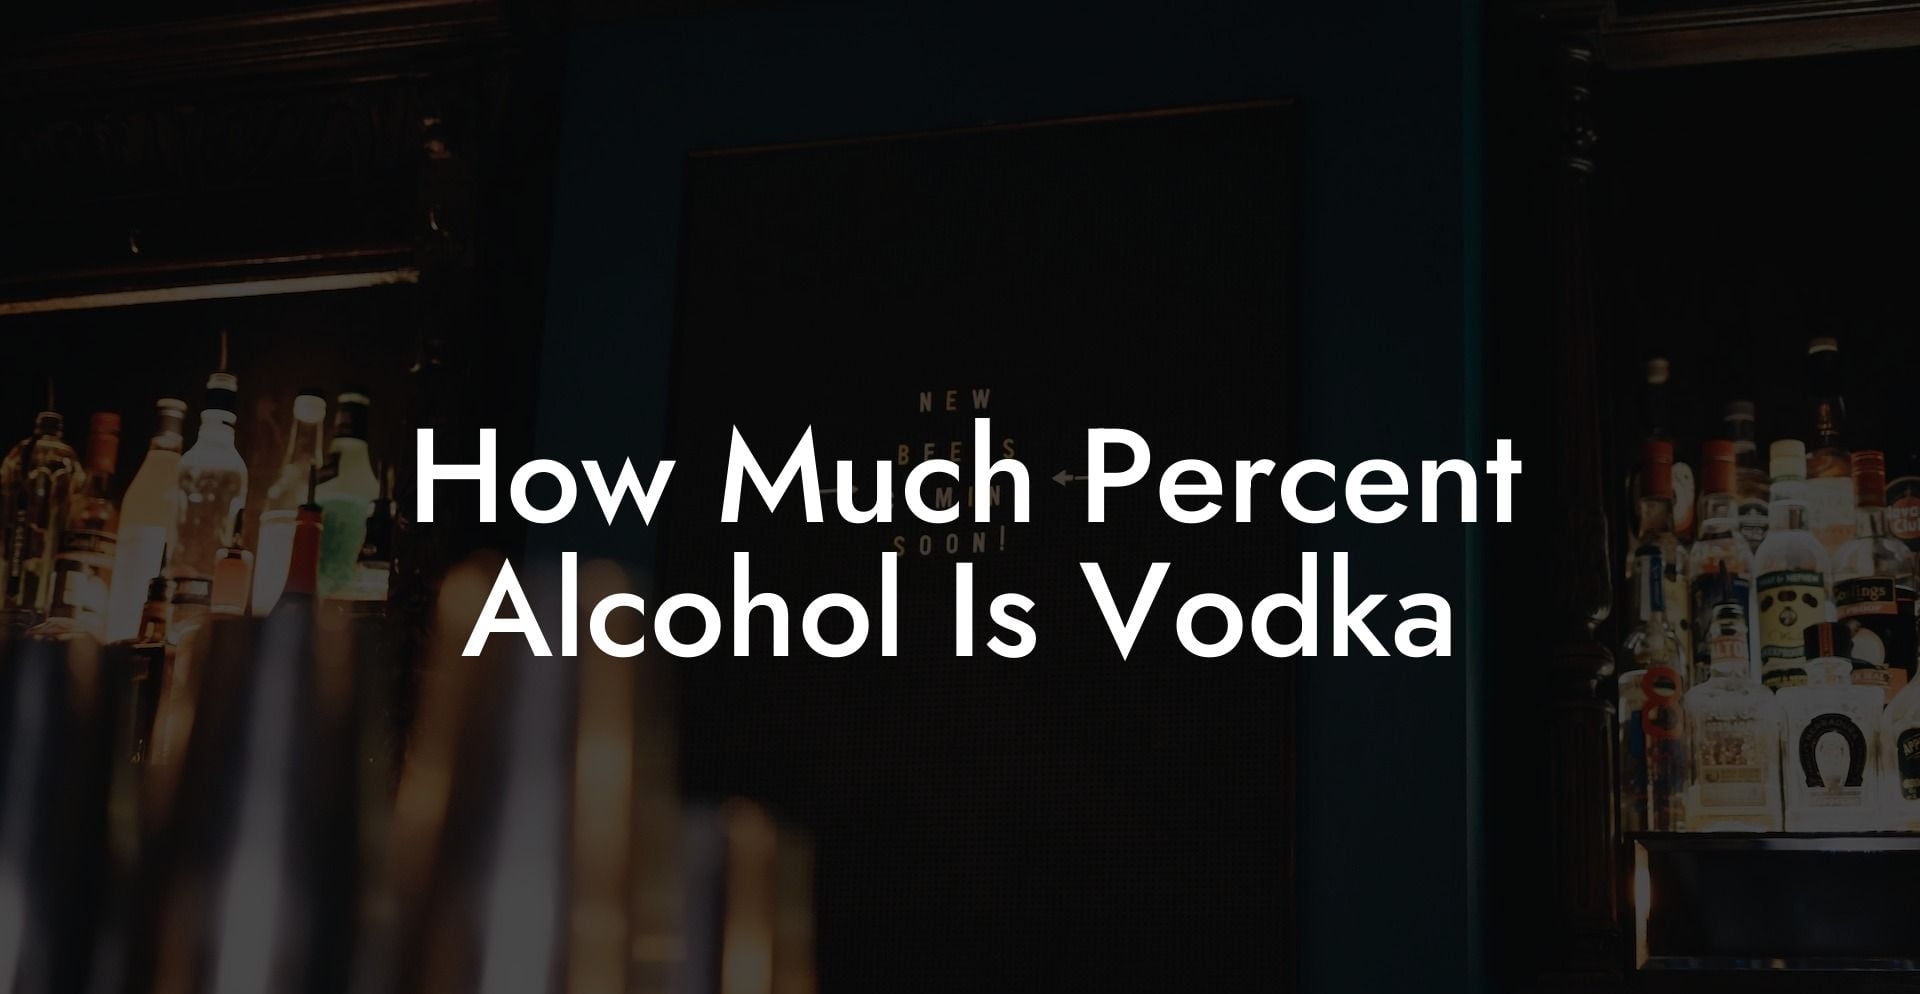 How Much Percent Alcohol Is Vodka